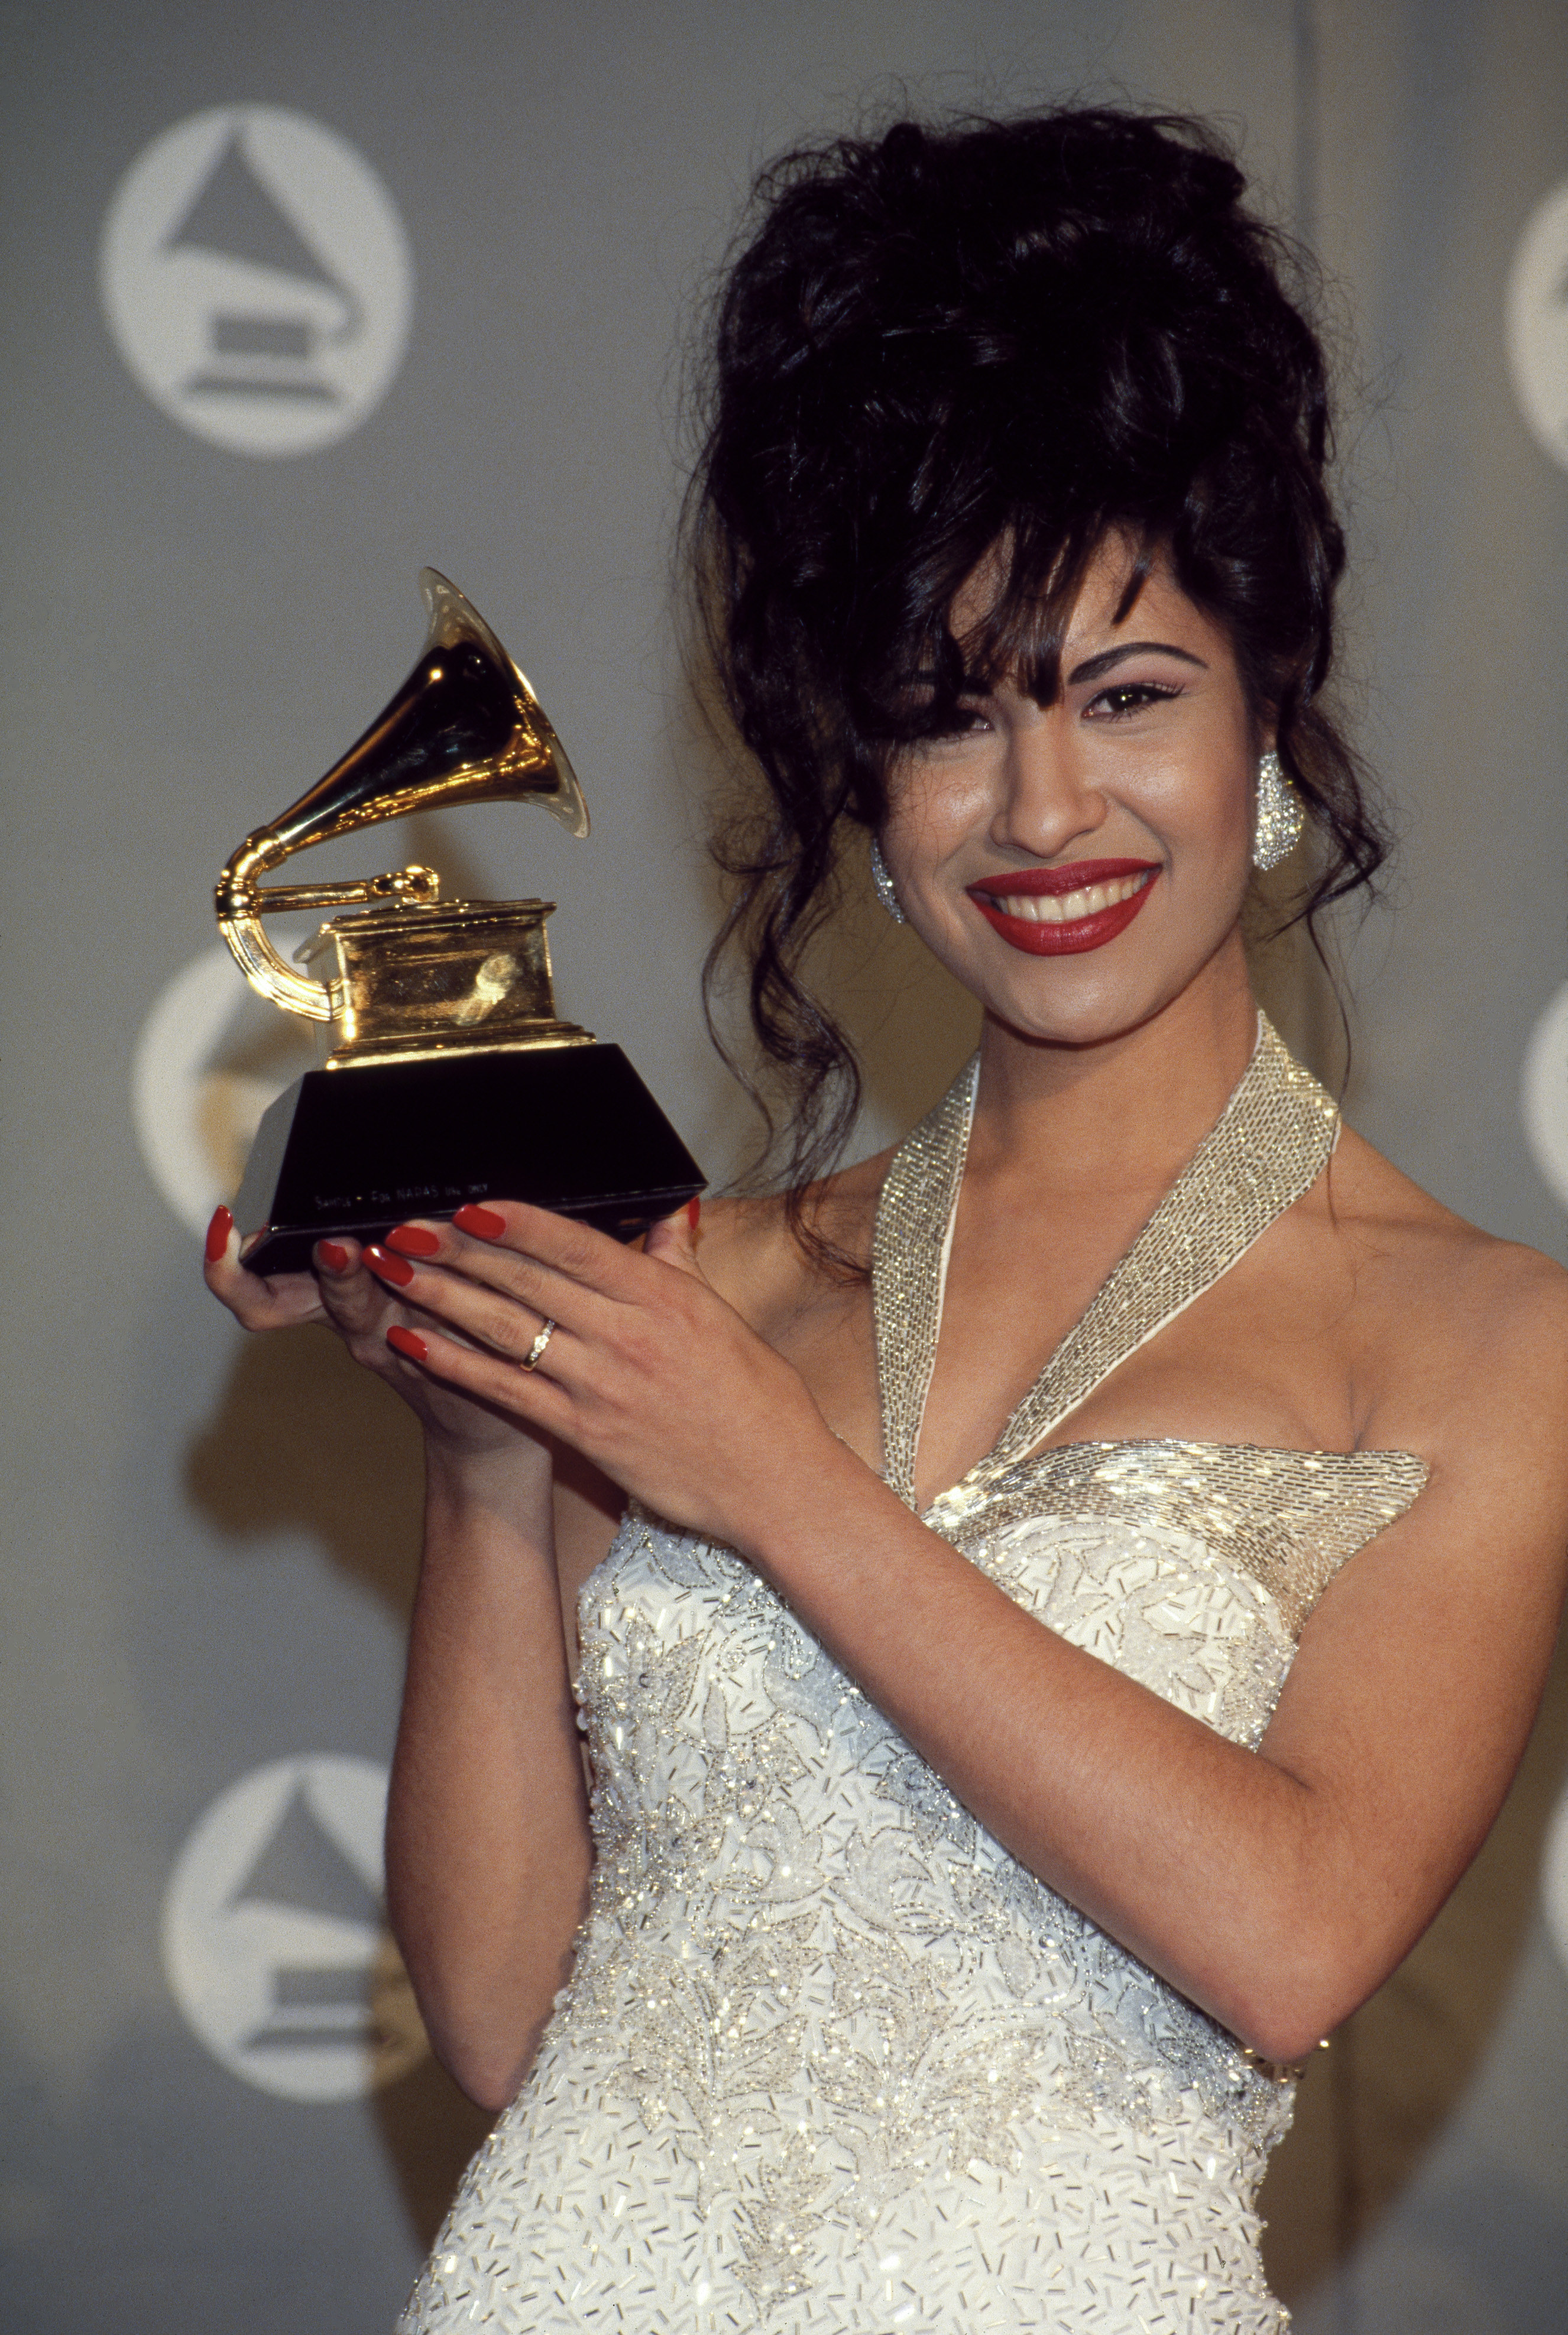 Selena poses with her Grammy Award on March 1, 1994